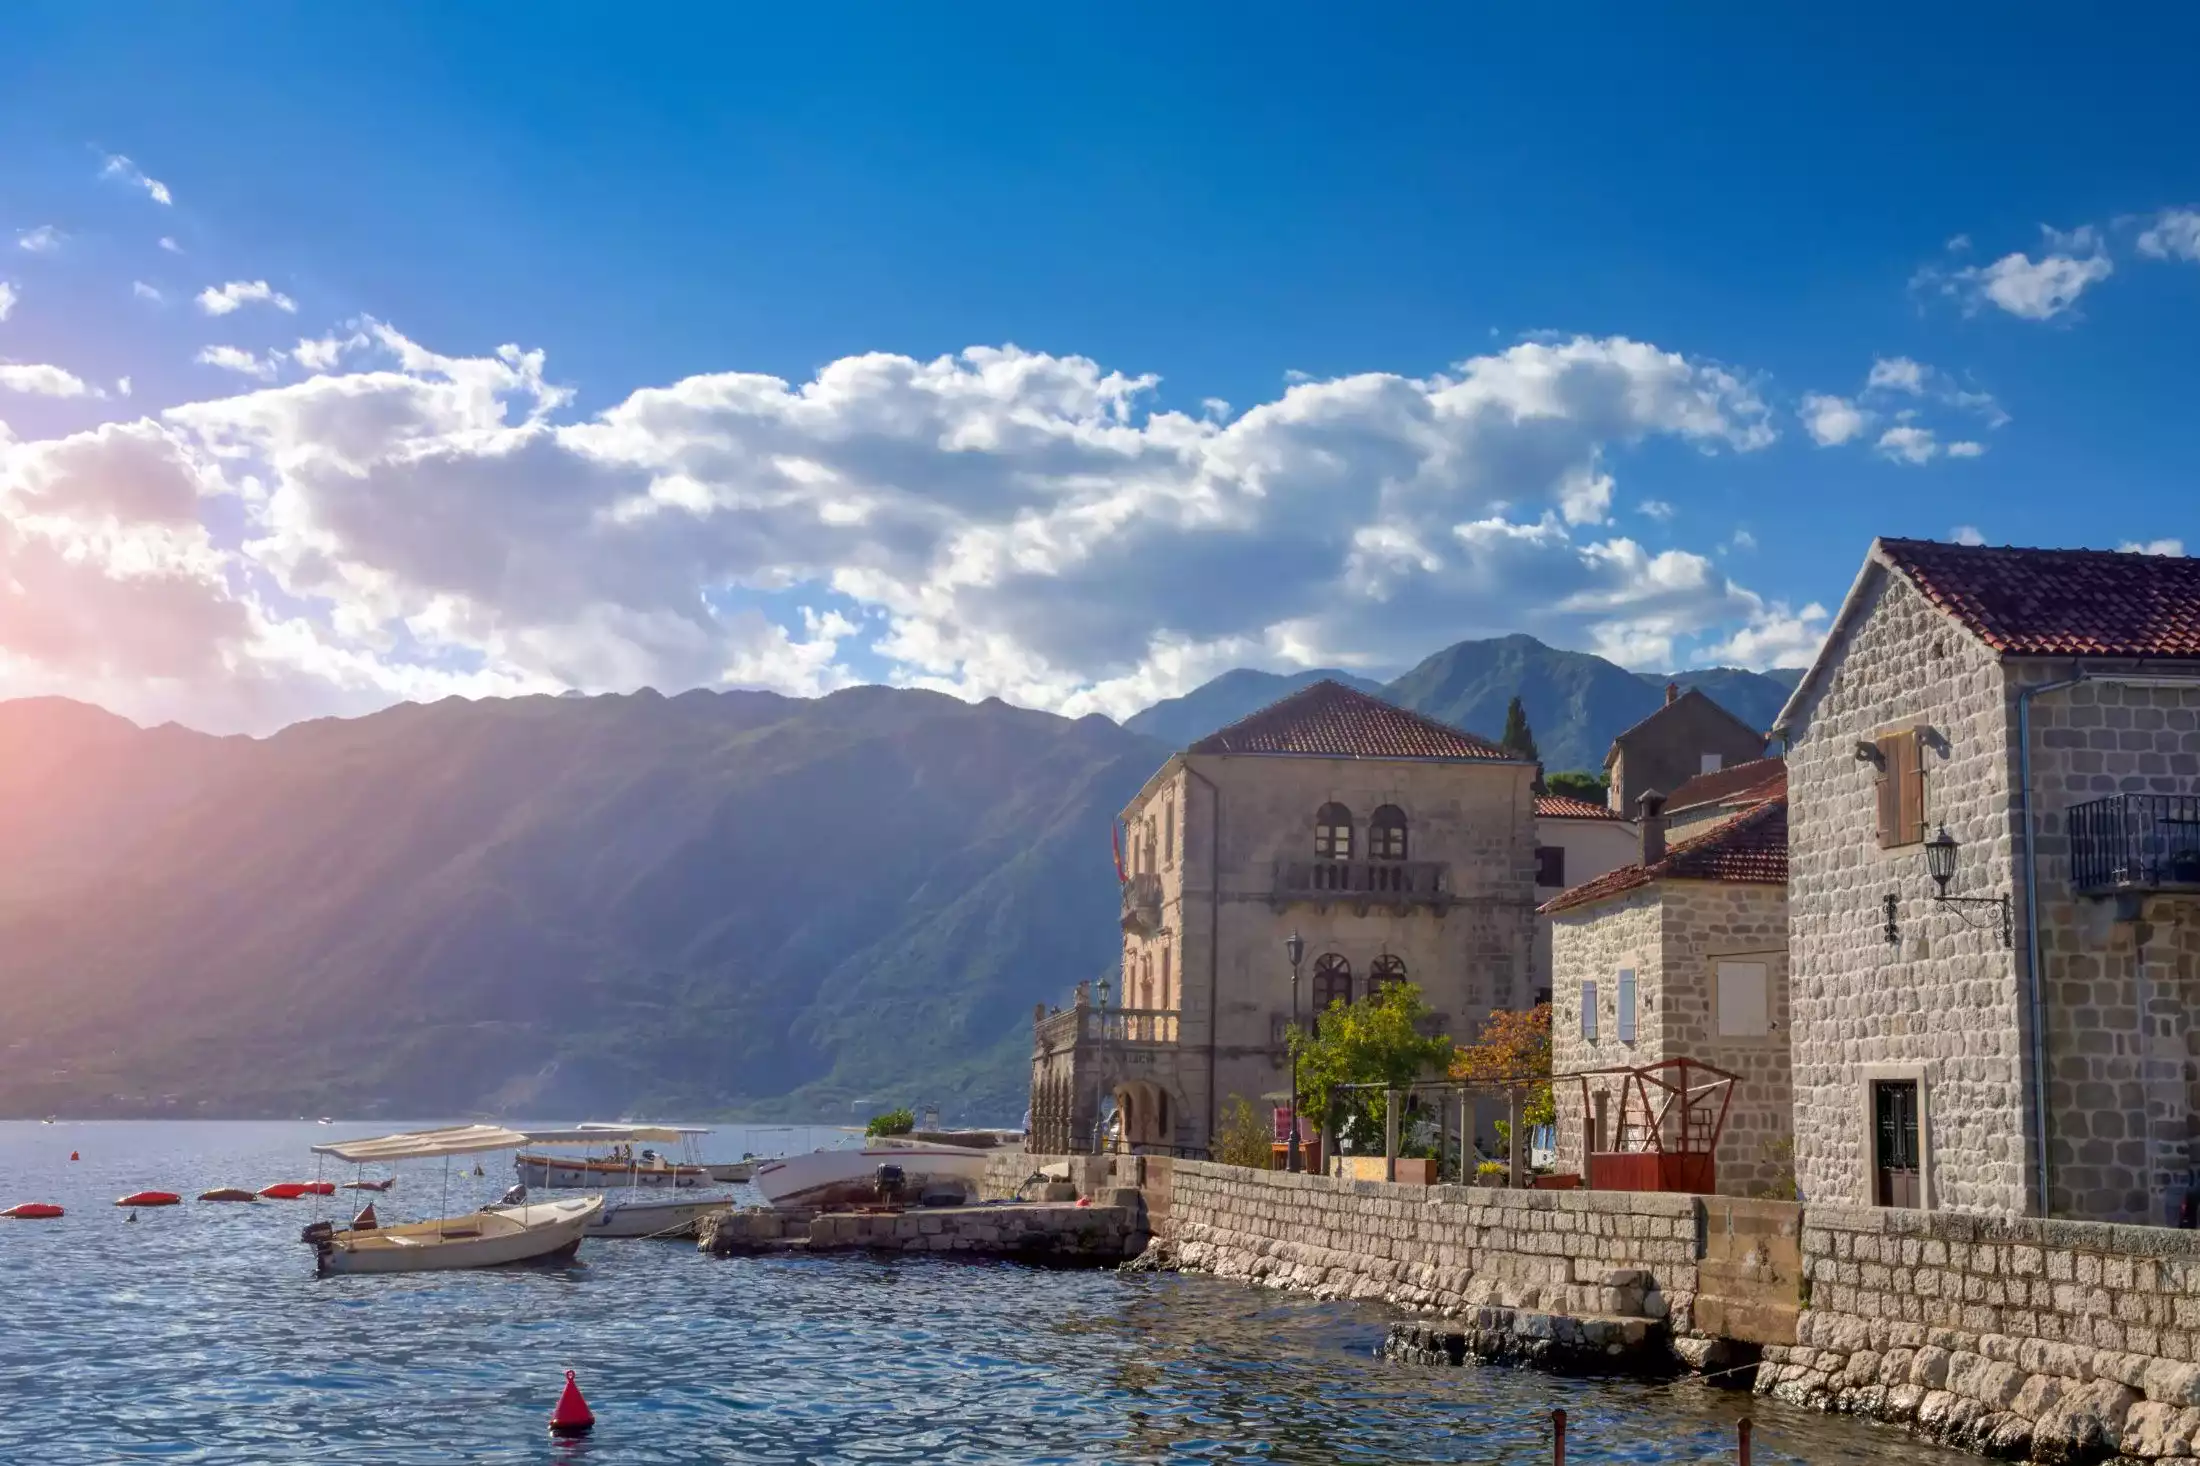 Street of Perast, by the Adratic Sea